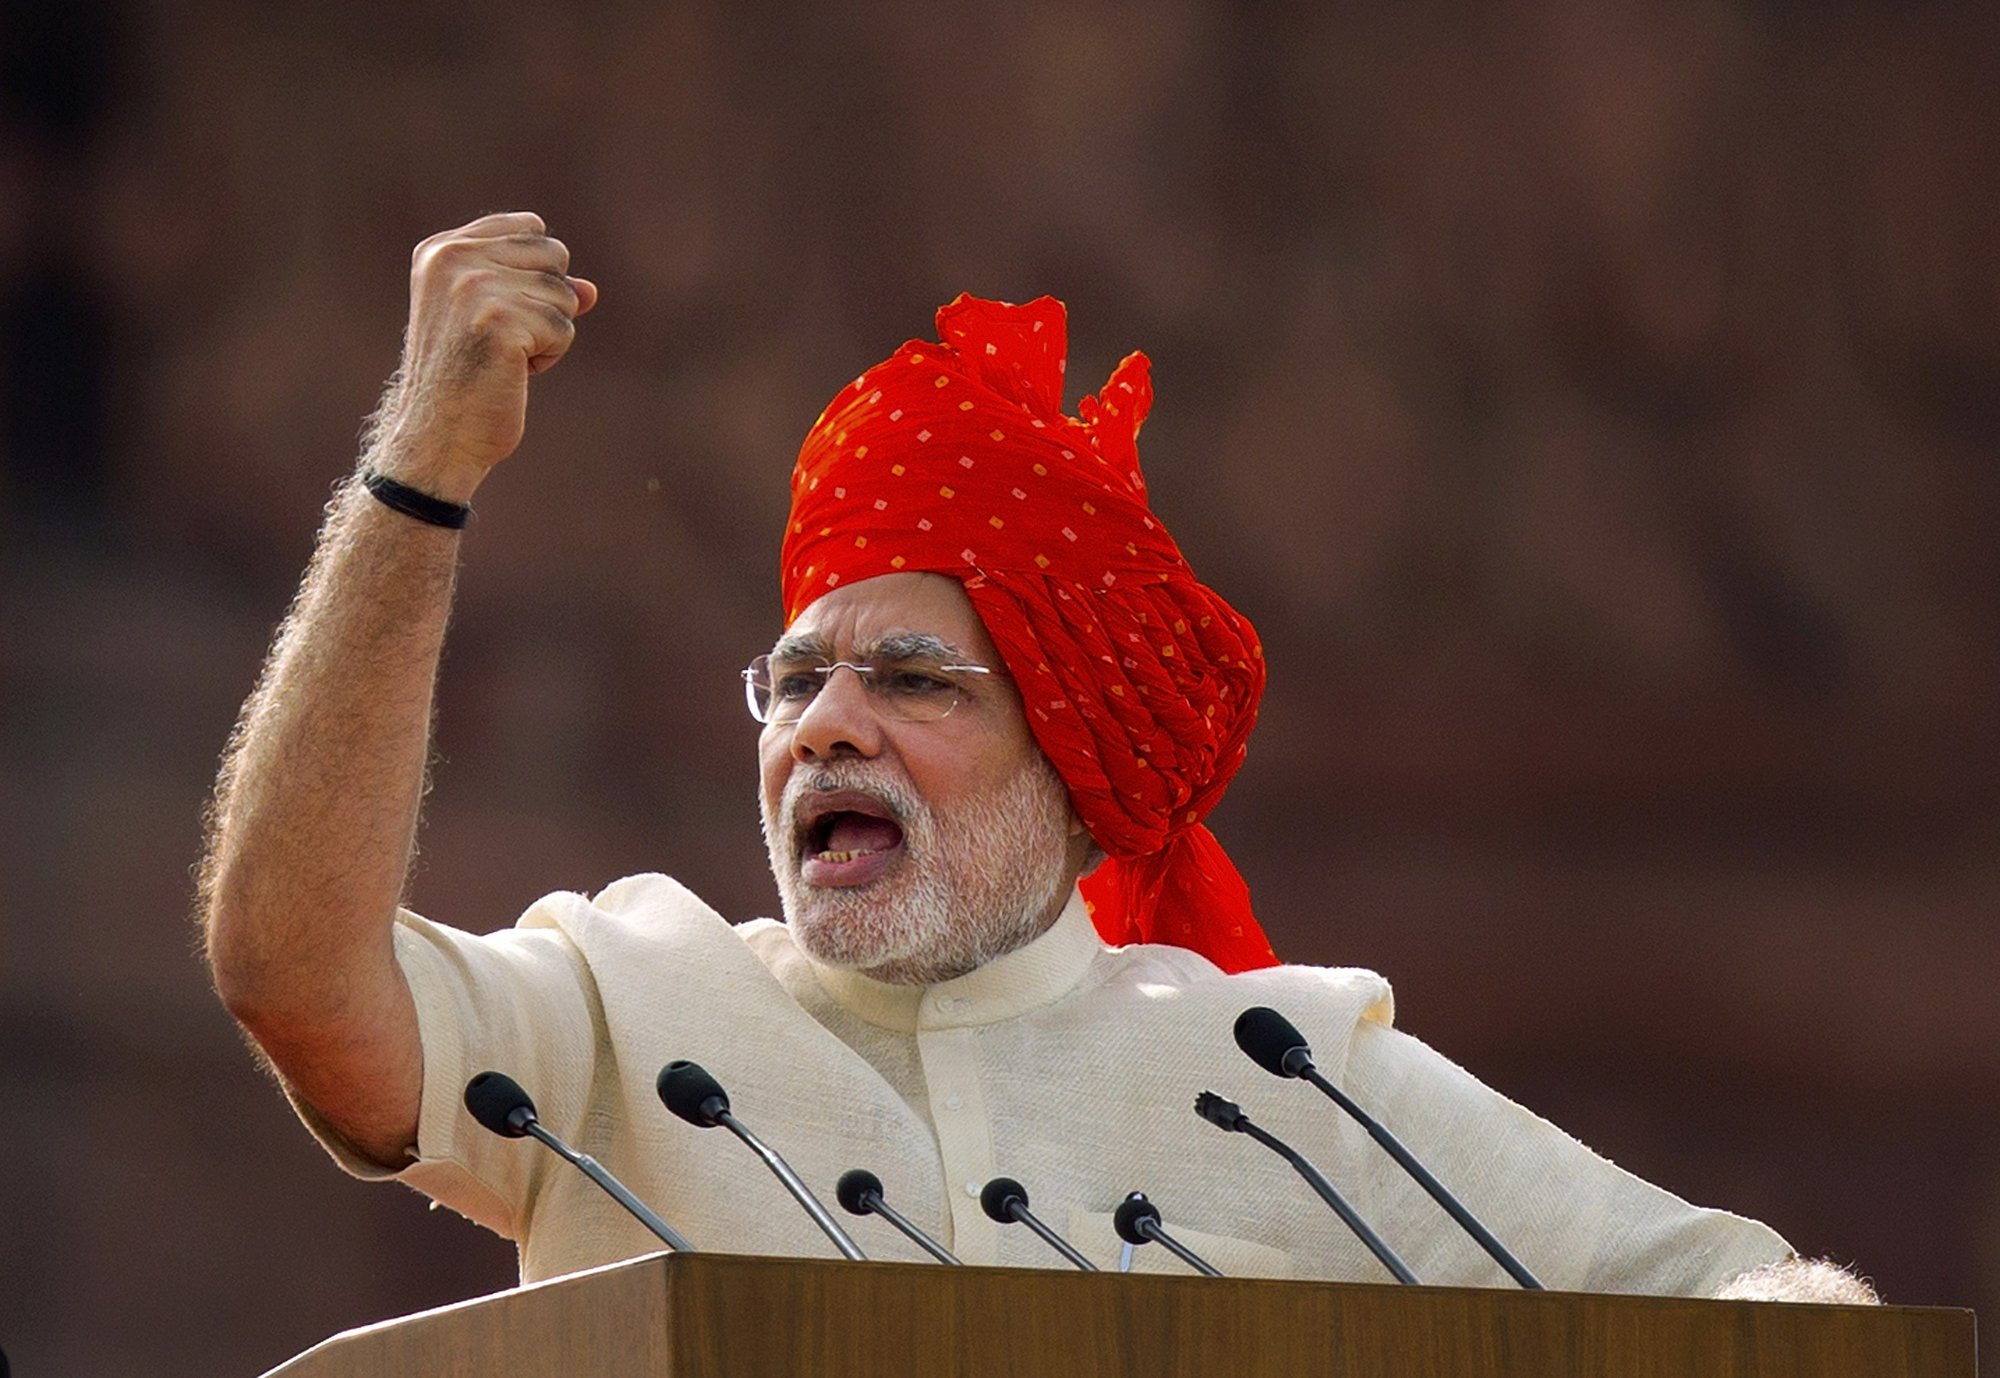 Analysis: India’s Modi faces foreign pressures in 2nd term